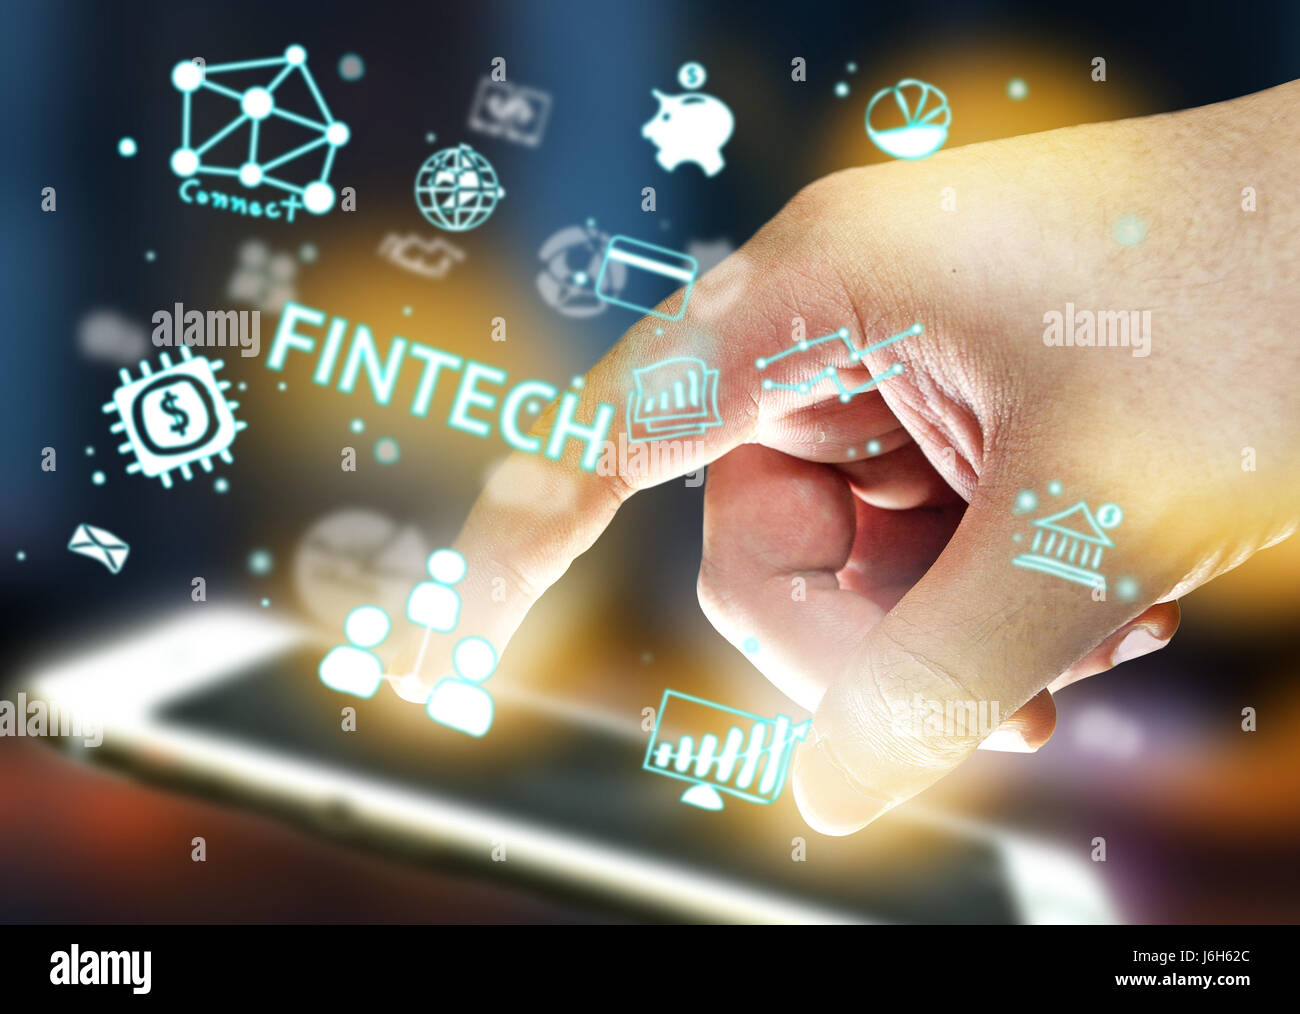 Fintech Investment Financial Internet Technology Concept. Smartphone , finger , icon and abstract background Stock Photo